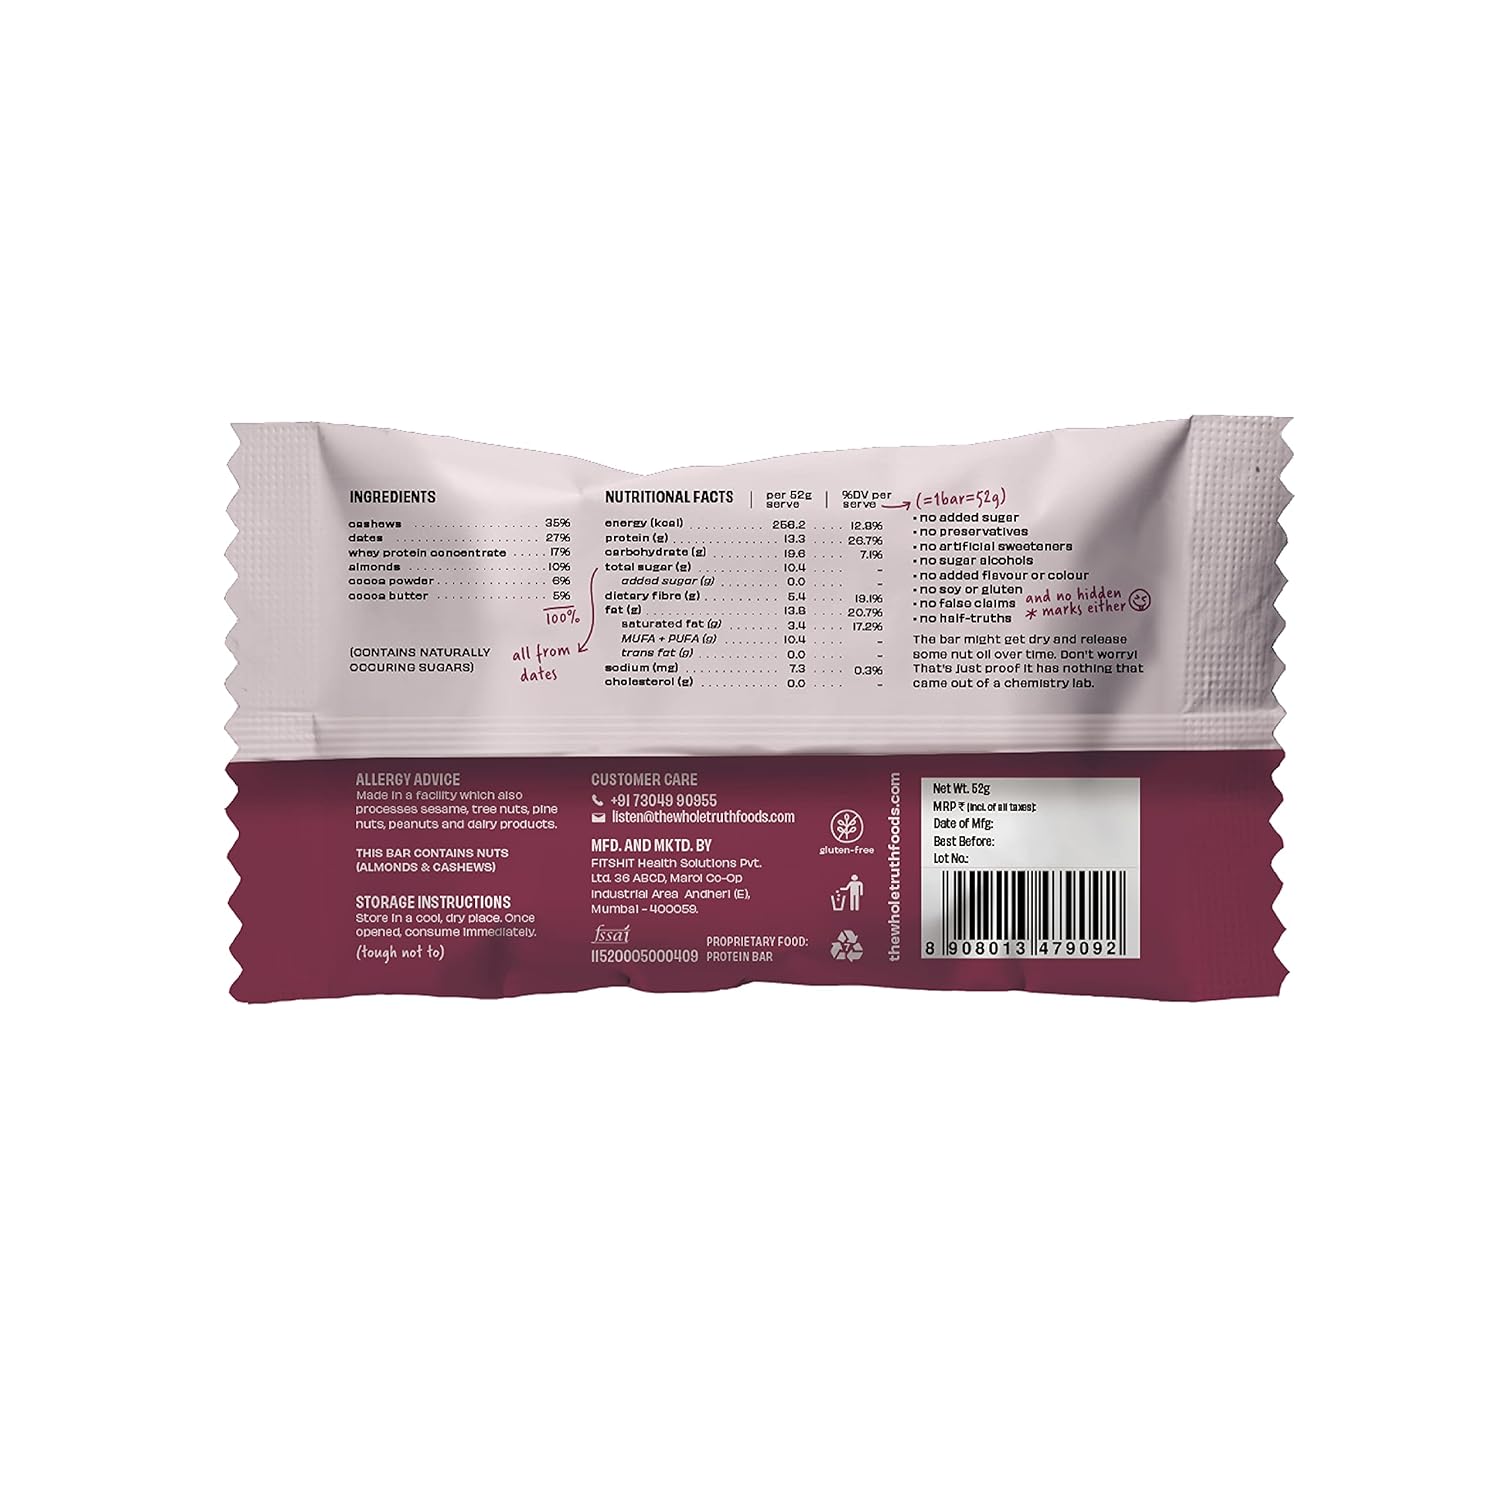 The Whole Truth - Protein Bars - Double Cocoa - Pack of 6 (6 x 52g) - No Added Sugar - All Natural